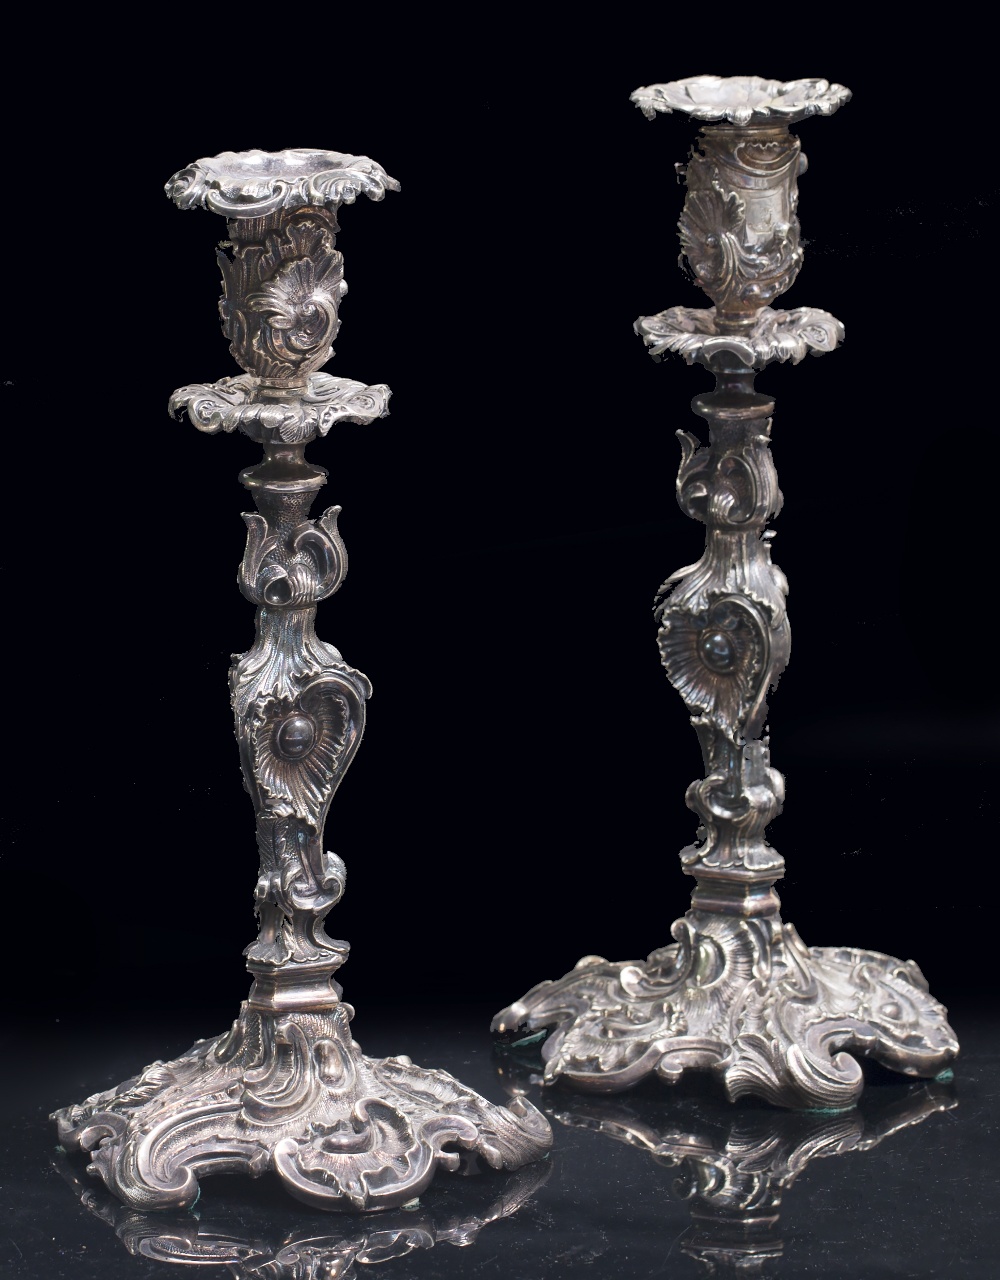 A PAIR OF ANTIQUE SILVER PLATED ROCOCO STYLE CANDLESTICKS possibly by Elkington & Co., each engraved